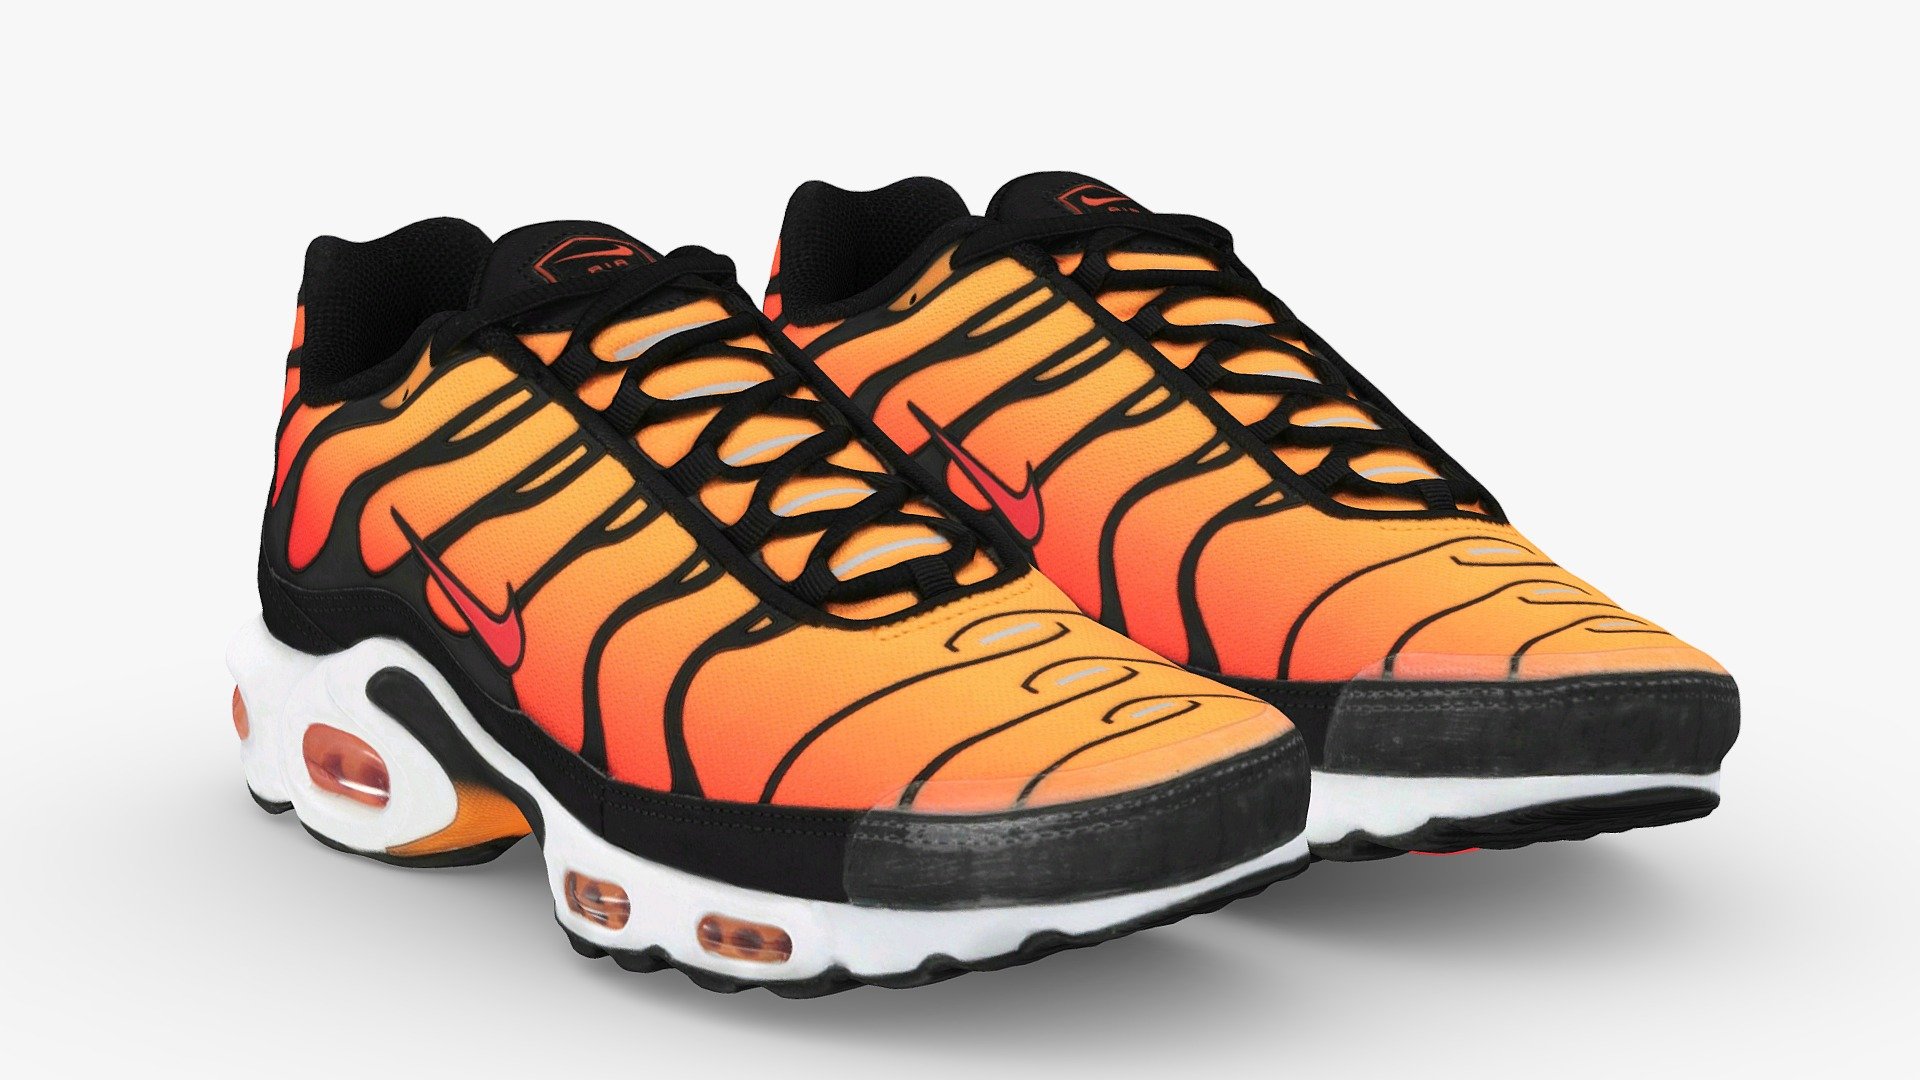 Secreto Cinemática cultura Nike Air Max Plus Og TN Tuned fashion sneaker - Buy Royalty Free 3D model  by Vincent Page (@vincentpage) [28a68fa]